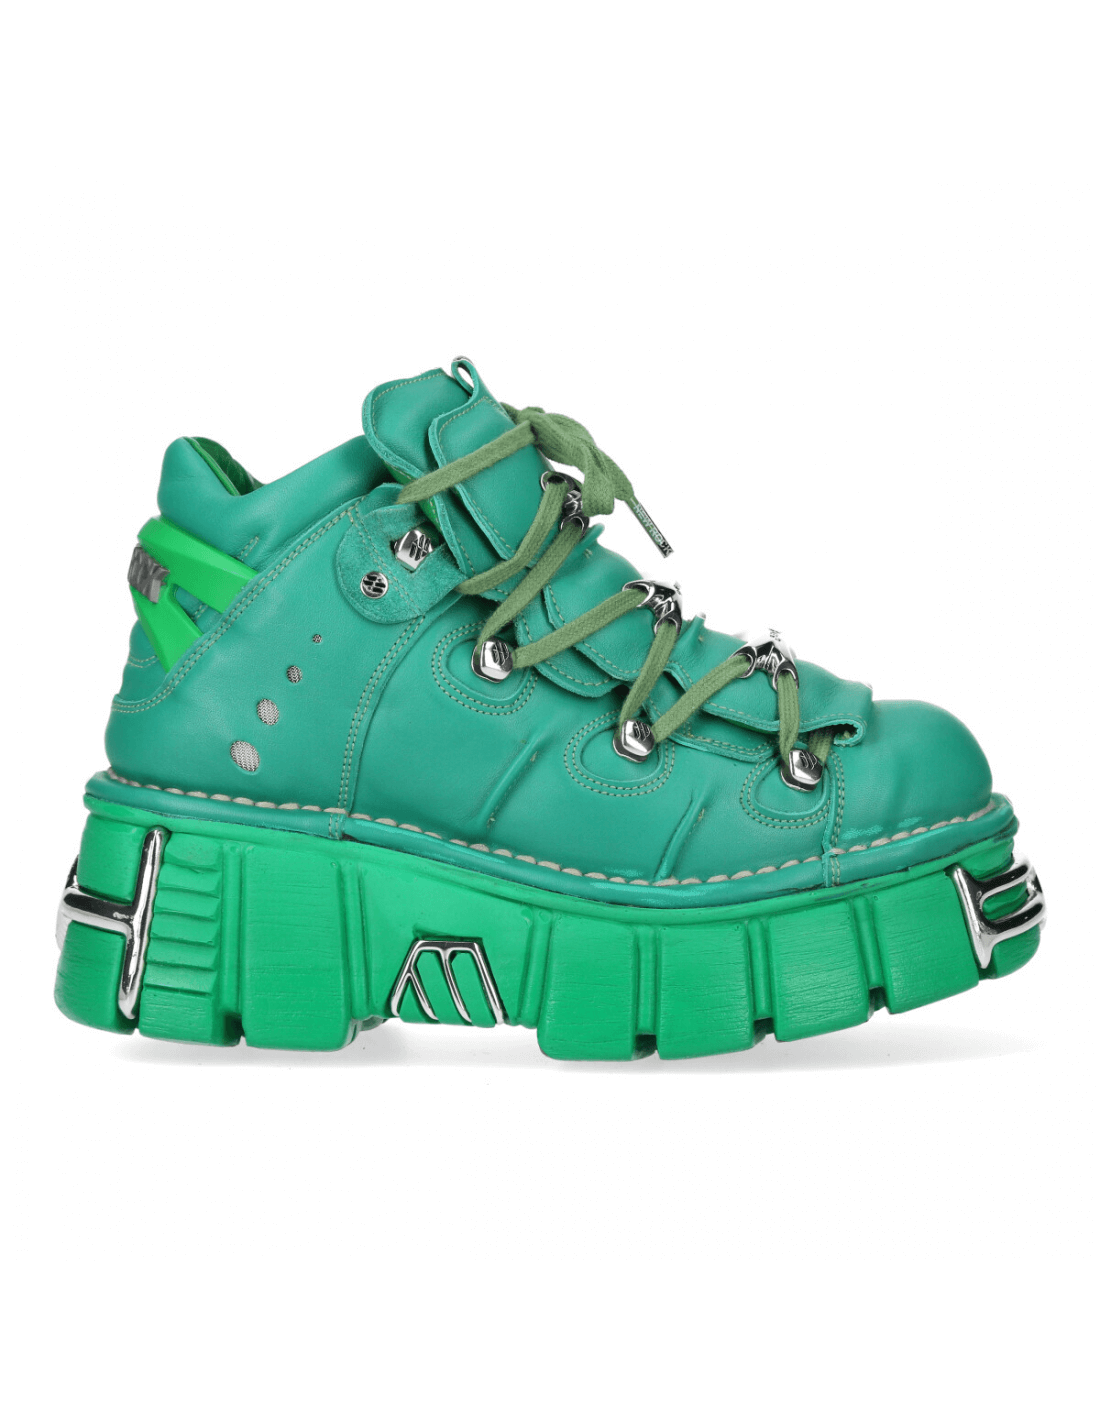 NEW ROCK Green Leather Ankle Boots with Metal Details